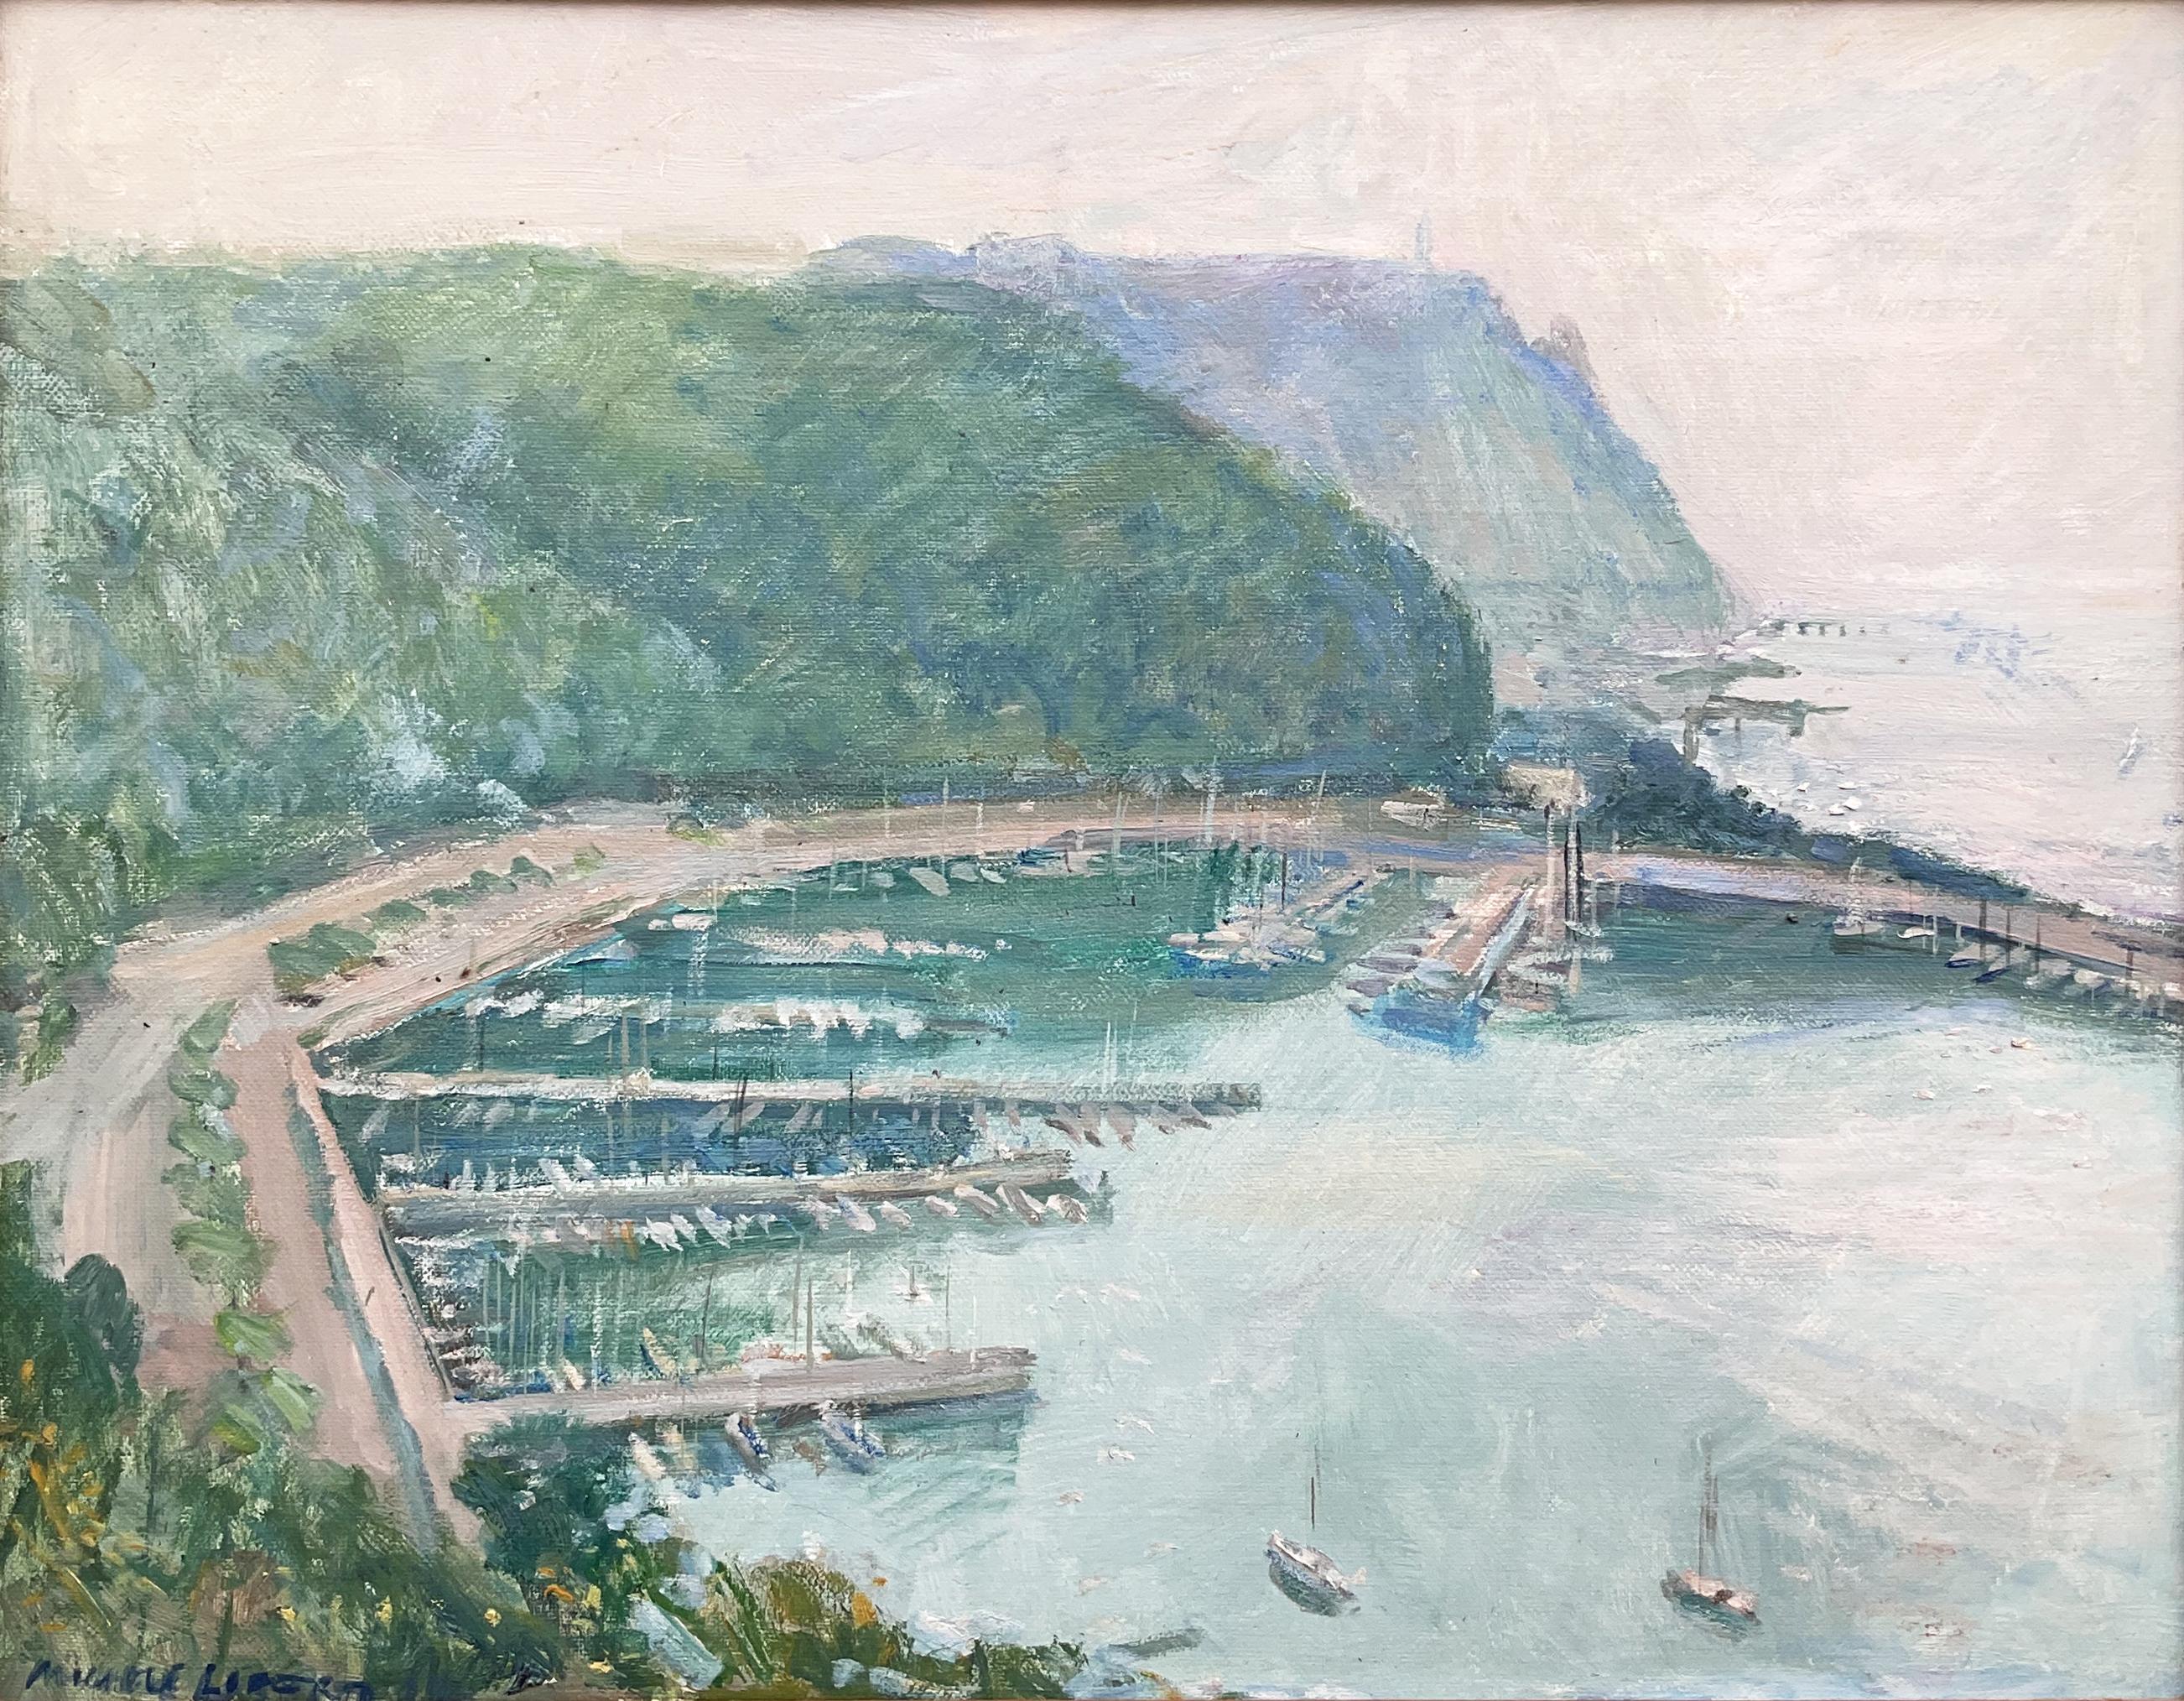 Michele Loberto
1922 - ?

View of Sistiana, Trieste, 1994
oil on canvas, 45x57 cm
Signature lower left: Michele Loberto
On the back ad personam dedication, signature, title and year

Painting in excellent condition depicting a view of the Gulf of